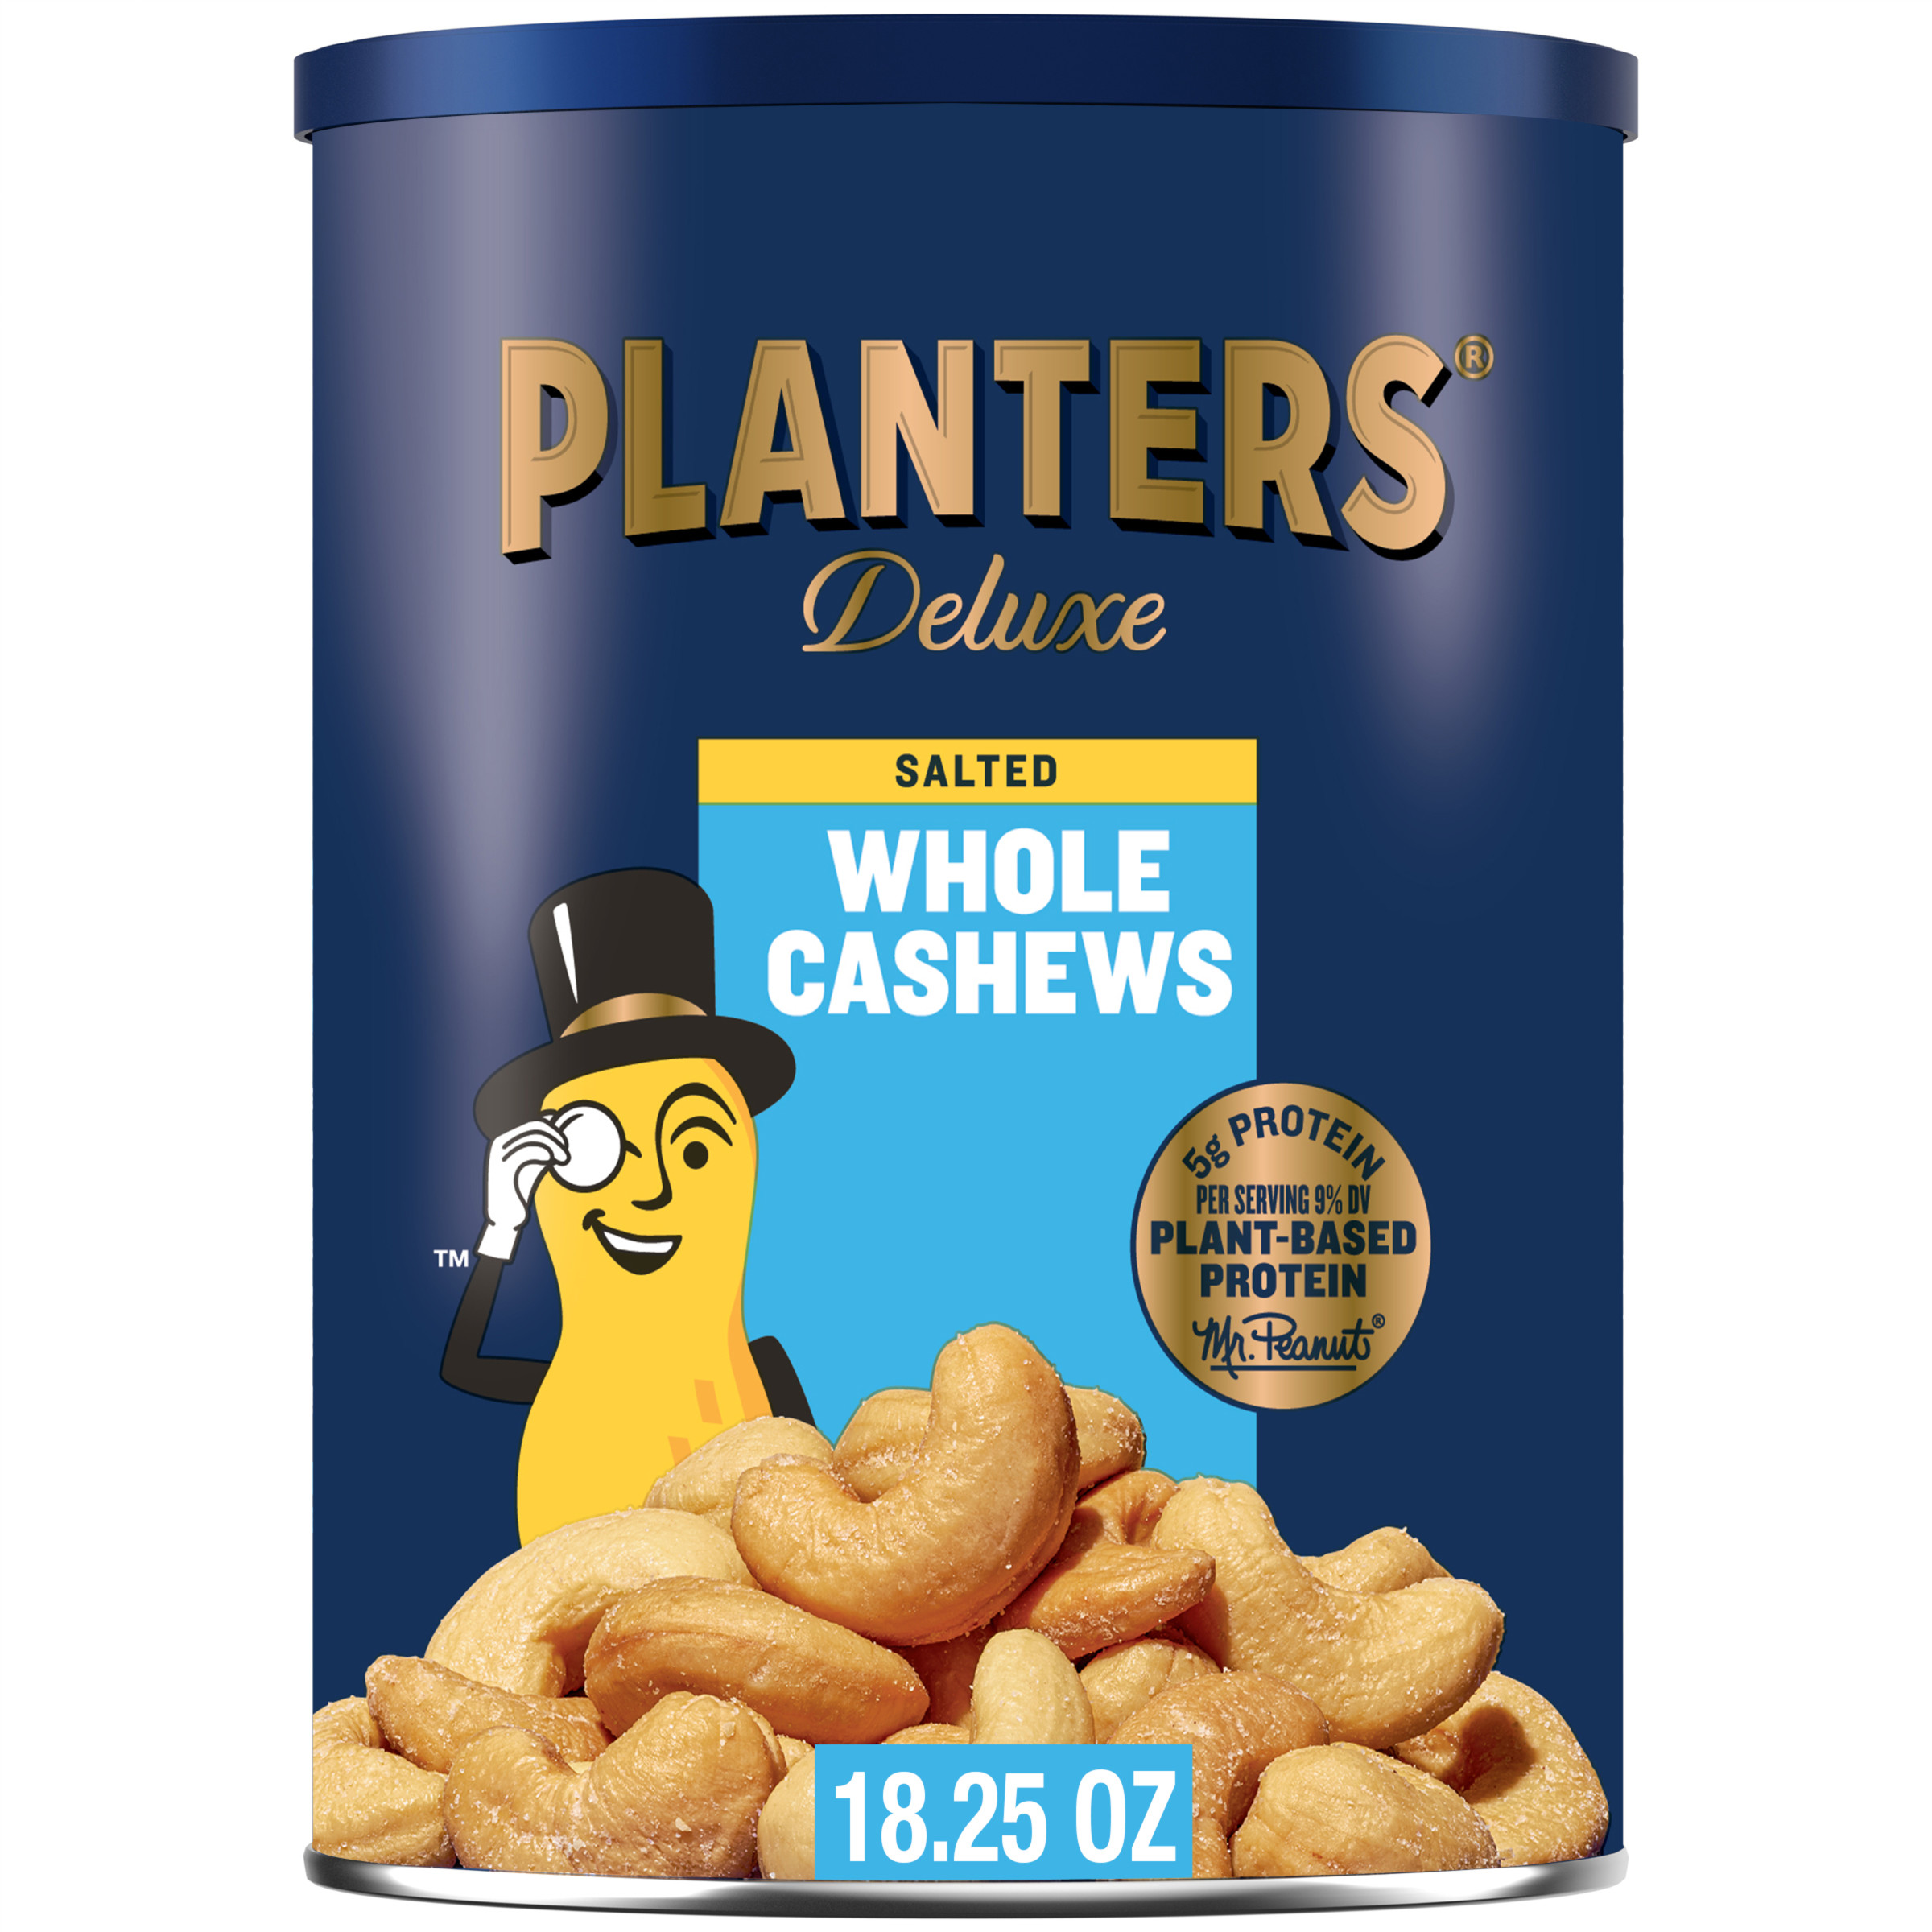 PLANTERS Deluxe Salted Whole Cashews, Party Snacks, Plant-Based Protein 18.25oz (1 Canister) - image 1 of 15